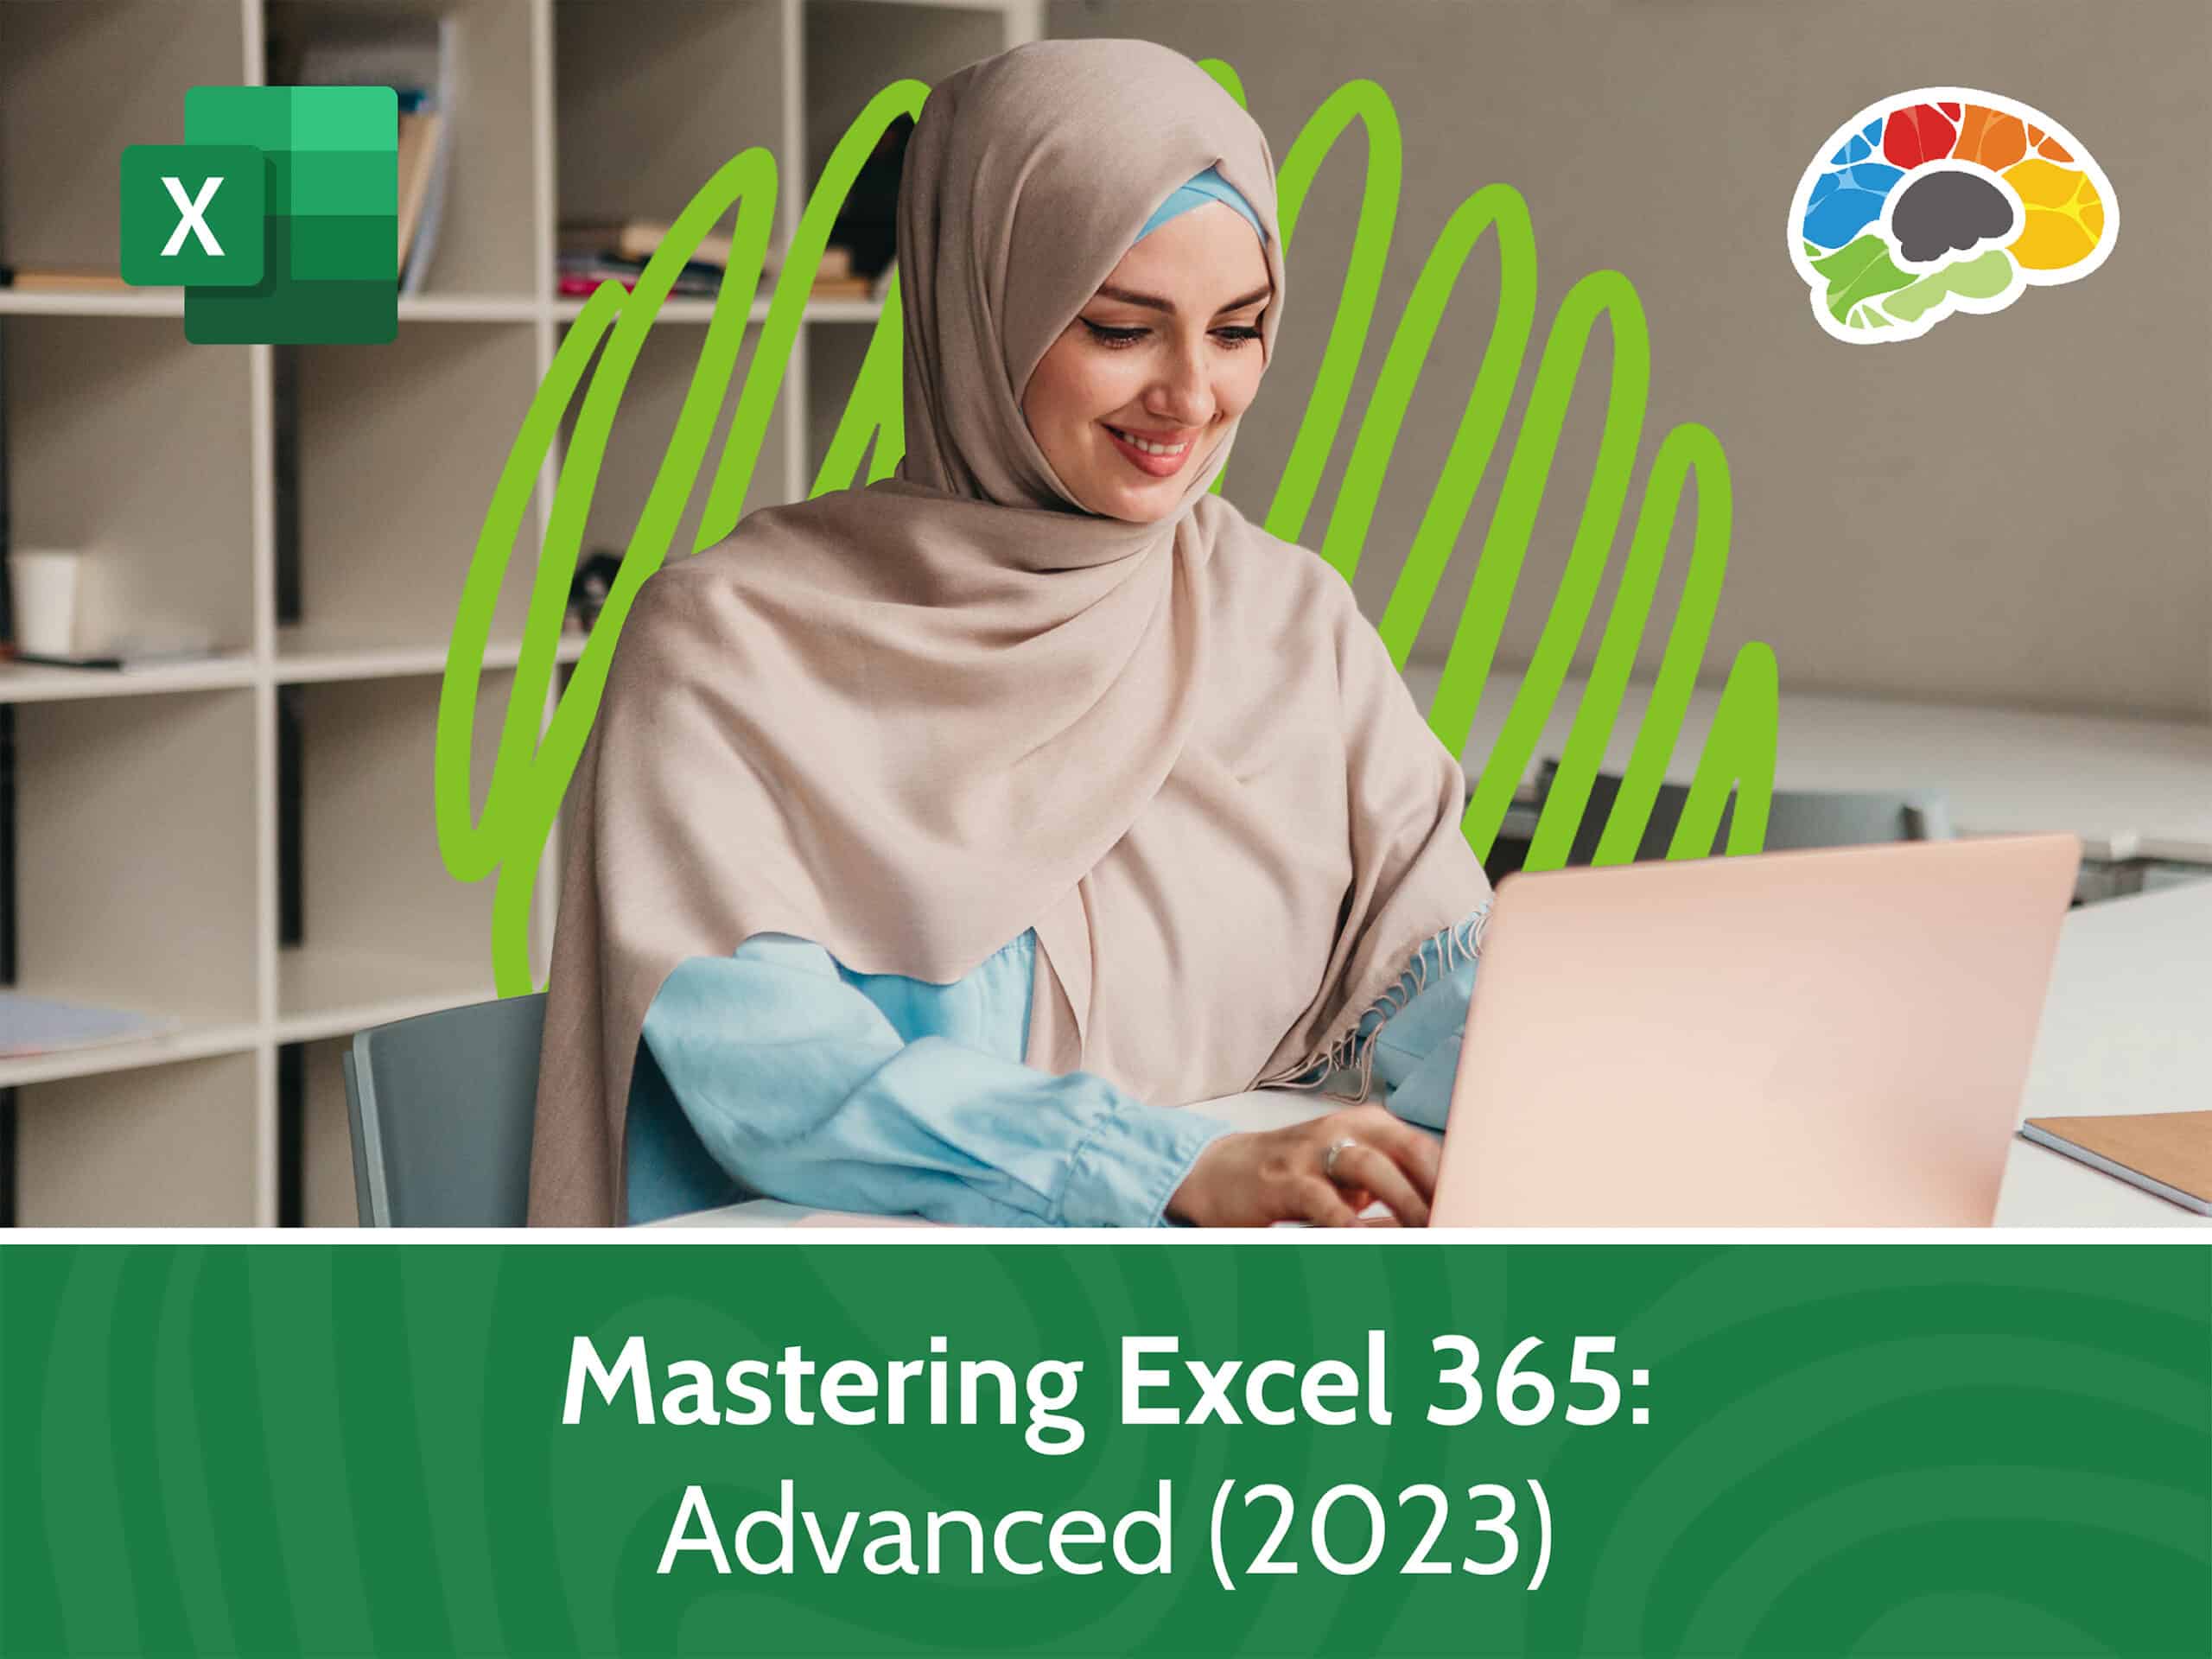 Mastering Excel 365 – Advanced 2023 scaled